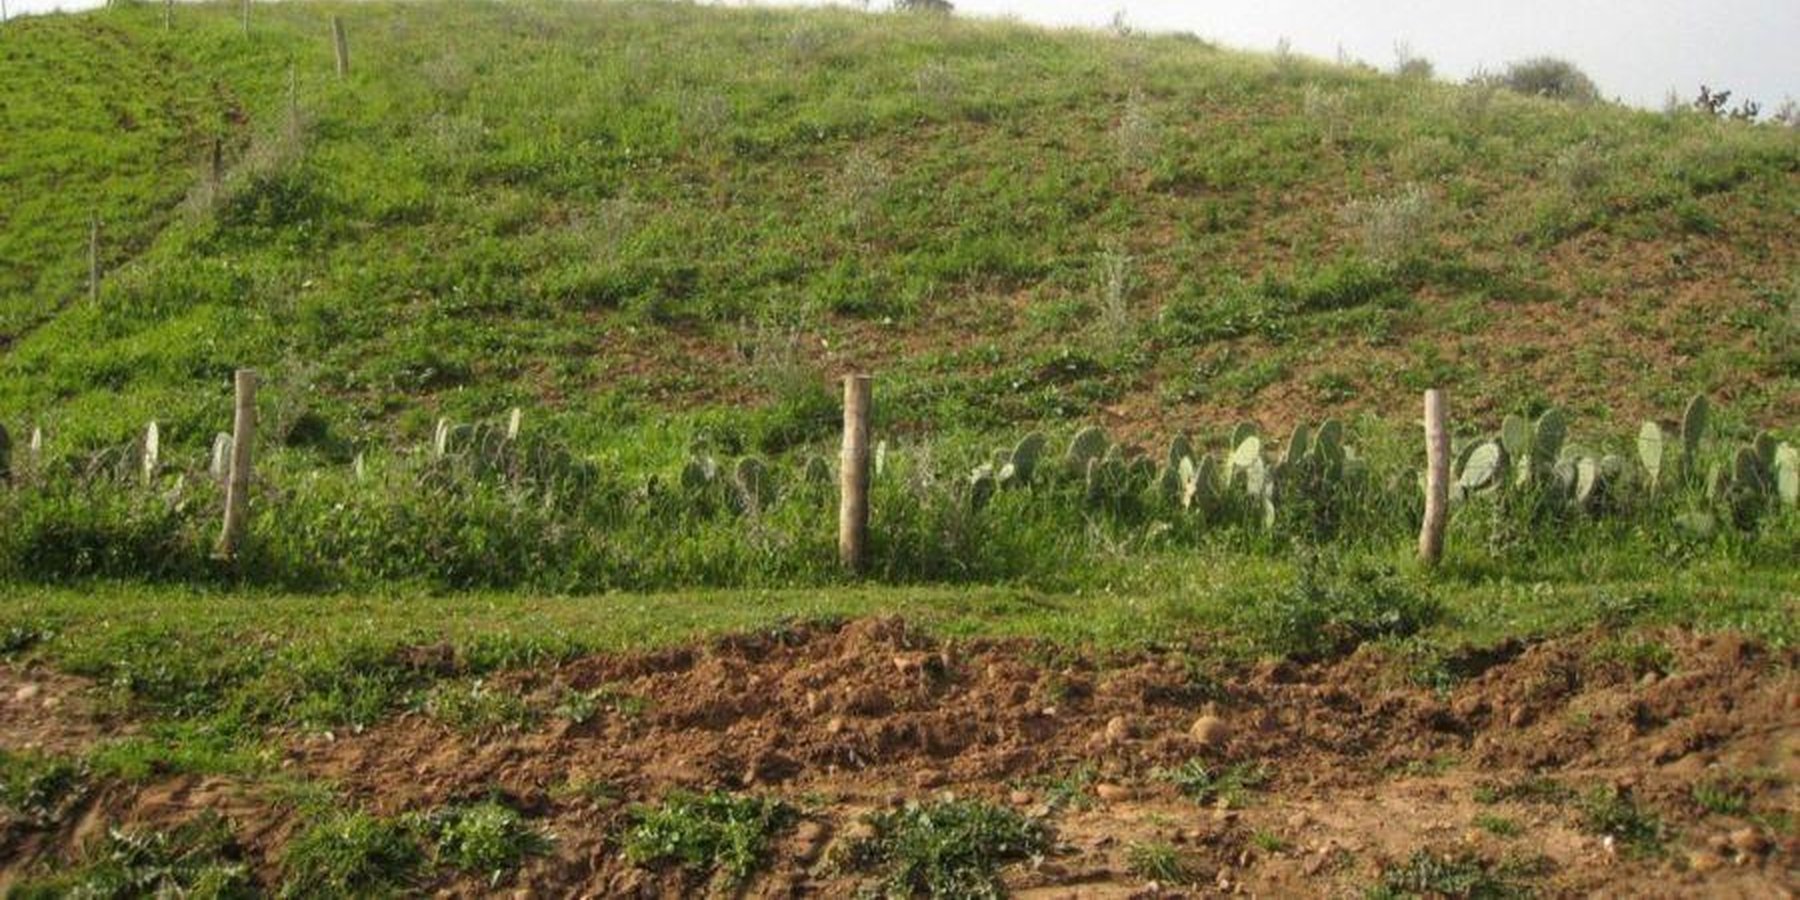 Vegetable production intensification through fruit trees plantation (in example olive trees). Here a plot with olive tree plantation as part of Sehoul PMVB